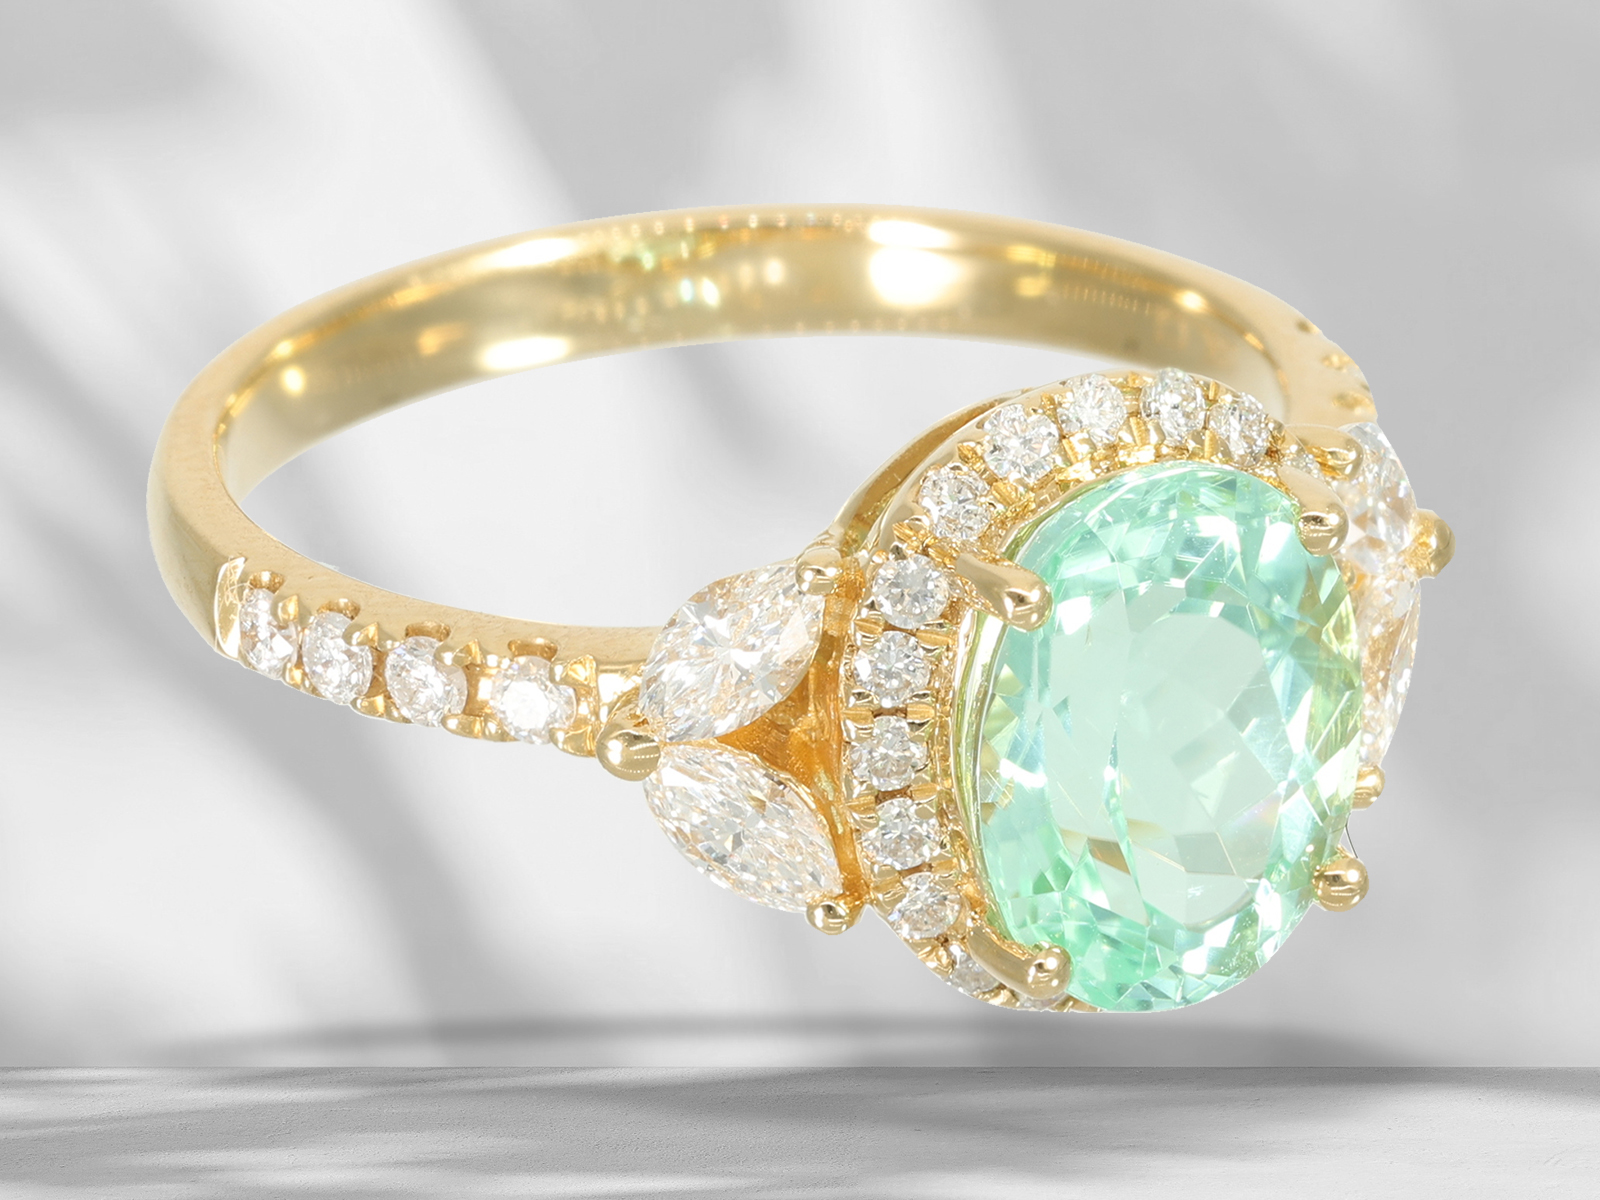 Ring: goldsmith ring with extremely rare Paraiba tourmaline and brilliant-cut diamonds, like new - Image 5 of 6